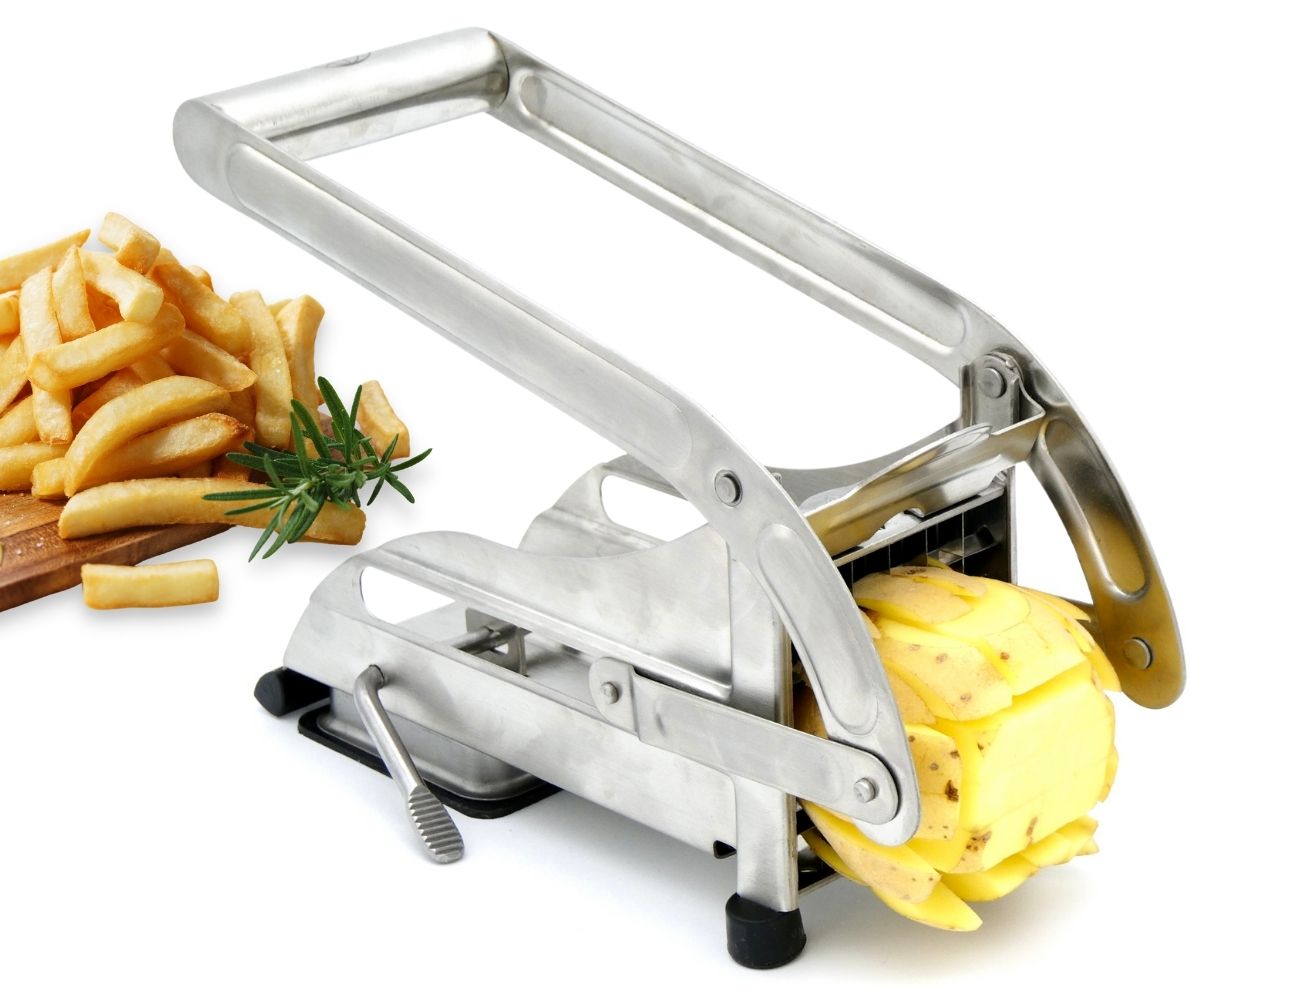 https://www.momjunction.com/wp-content/uploads/product-images/-impeccable-culinary-objects-french-fry-potato-cutter_afl64.jpg